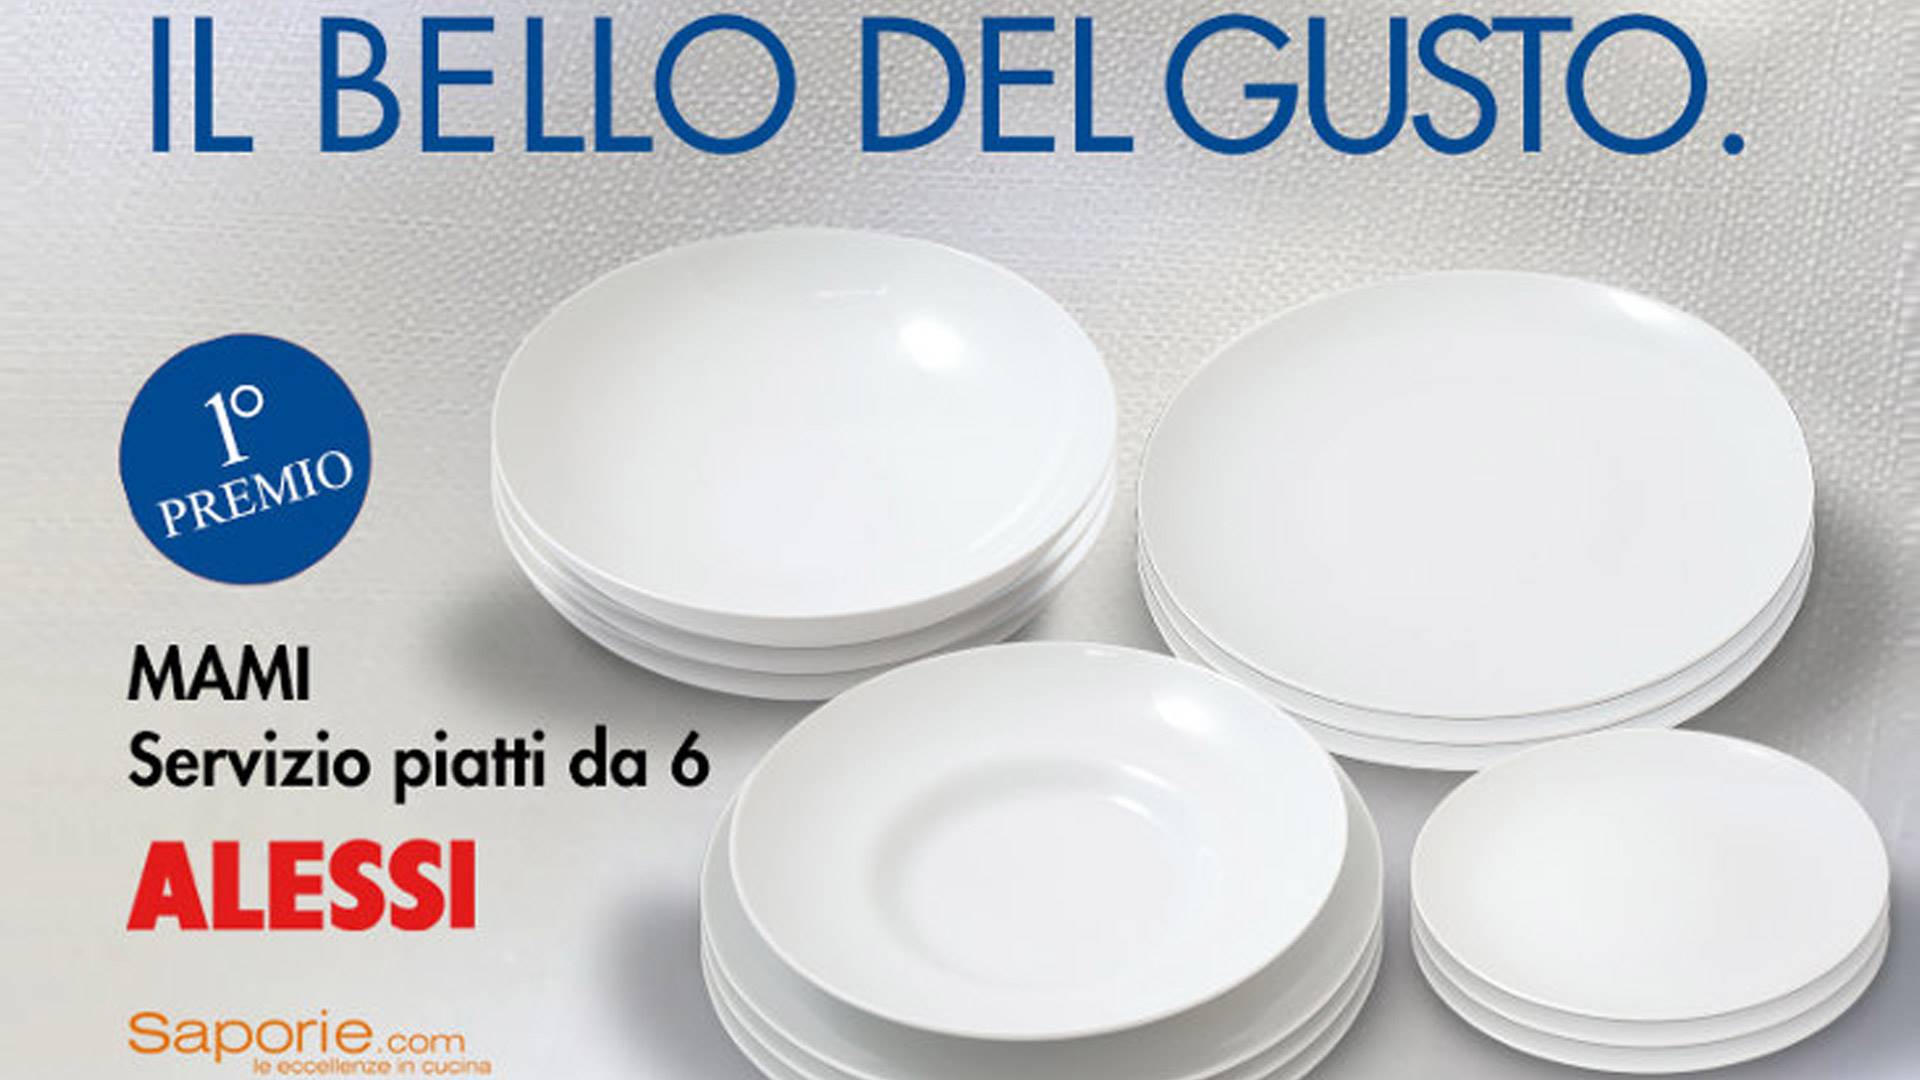 Alessi & Saporie <br>Social engagement